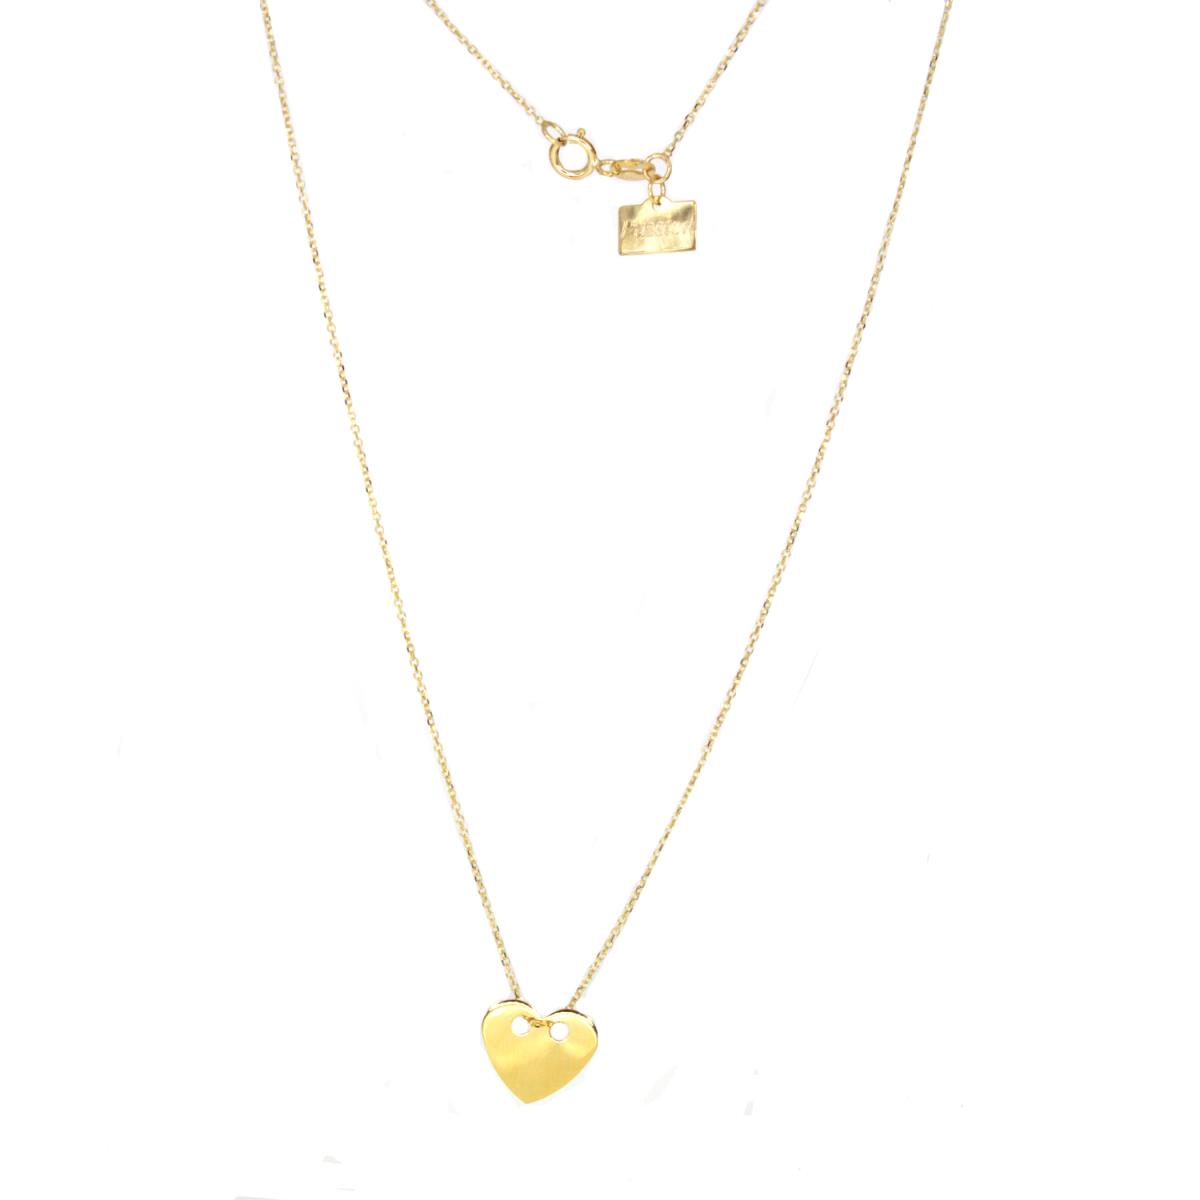 10K Yellow Gold Polished Heart Charm 15+1" Necklace with Passion Plate